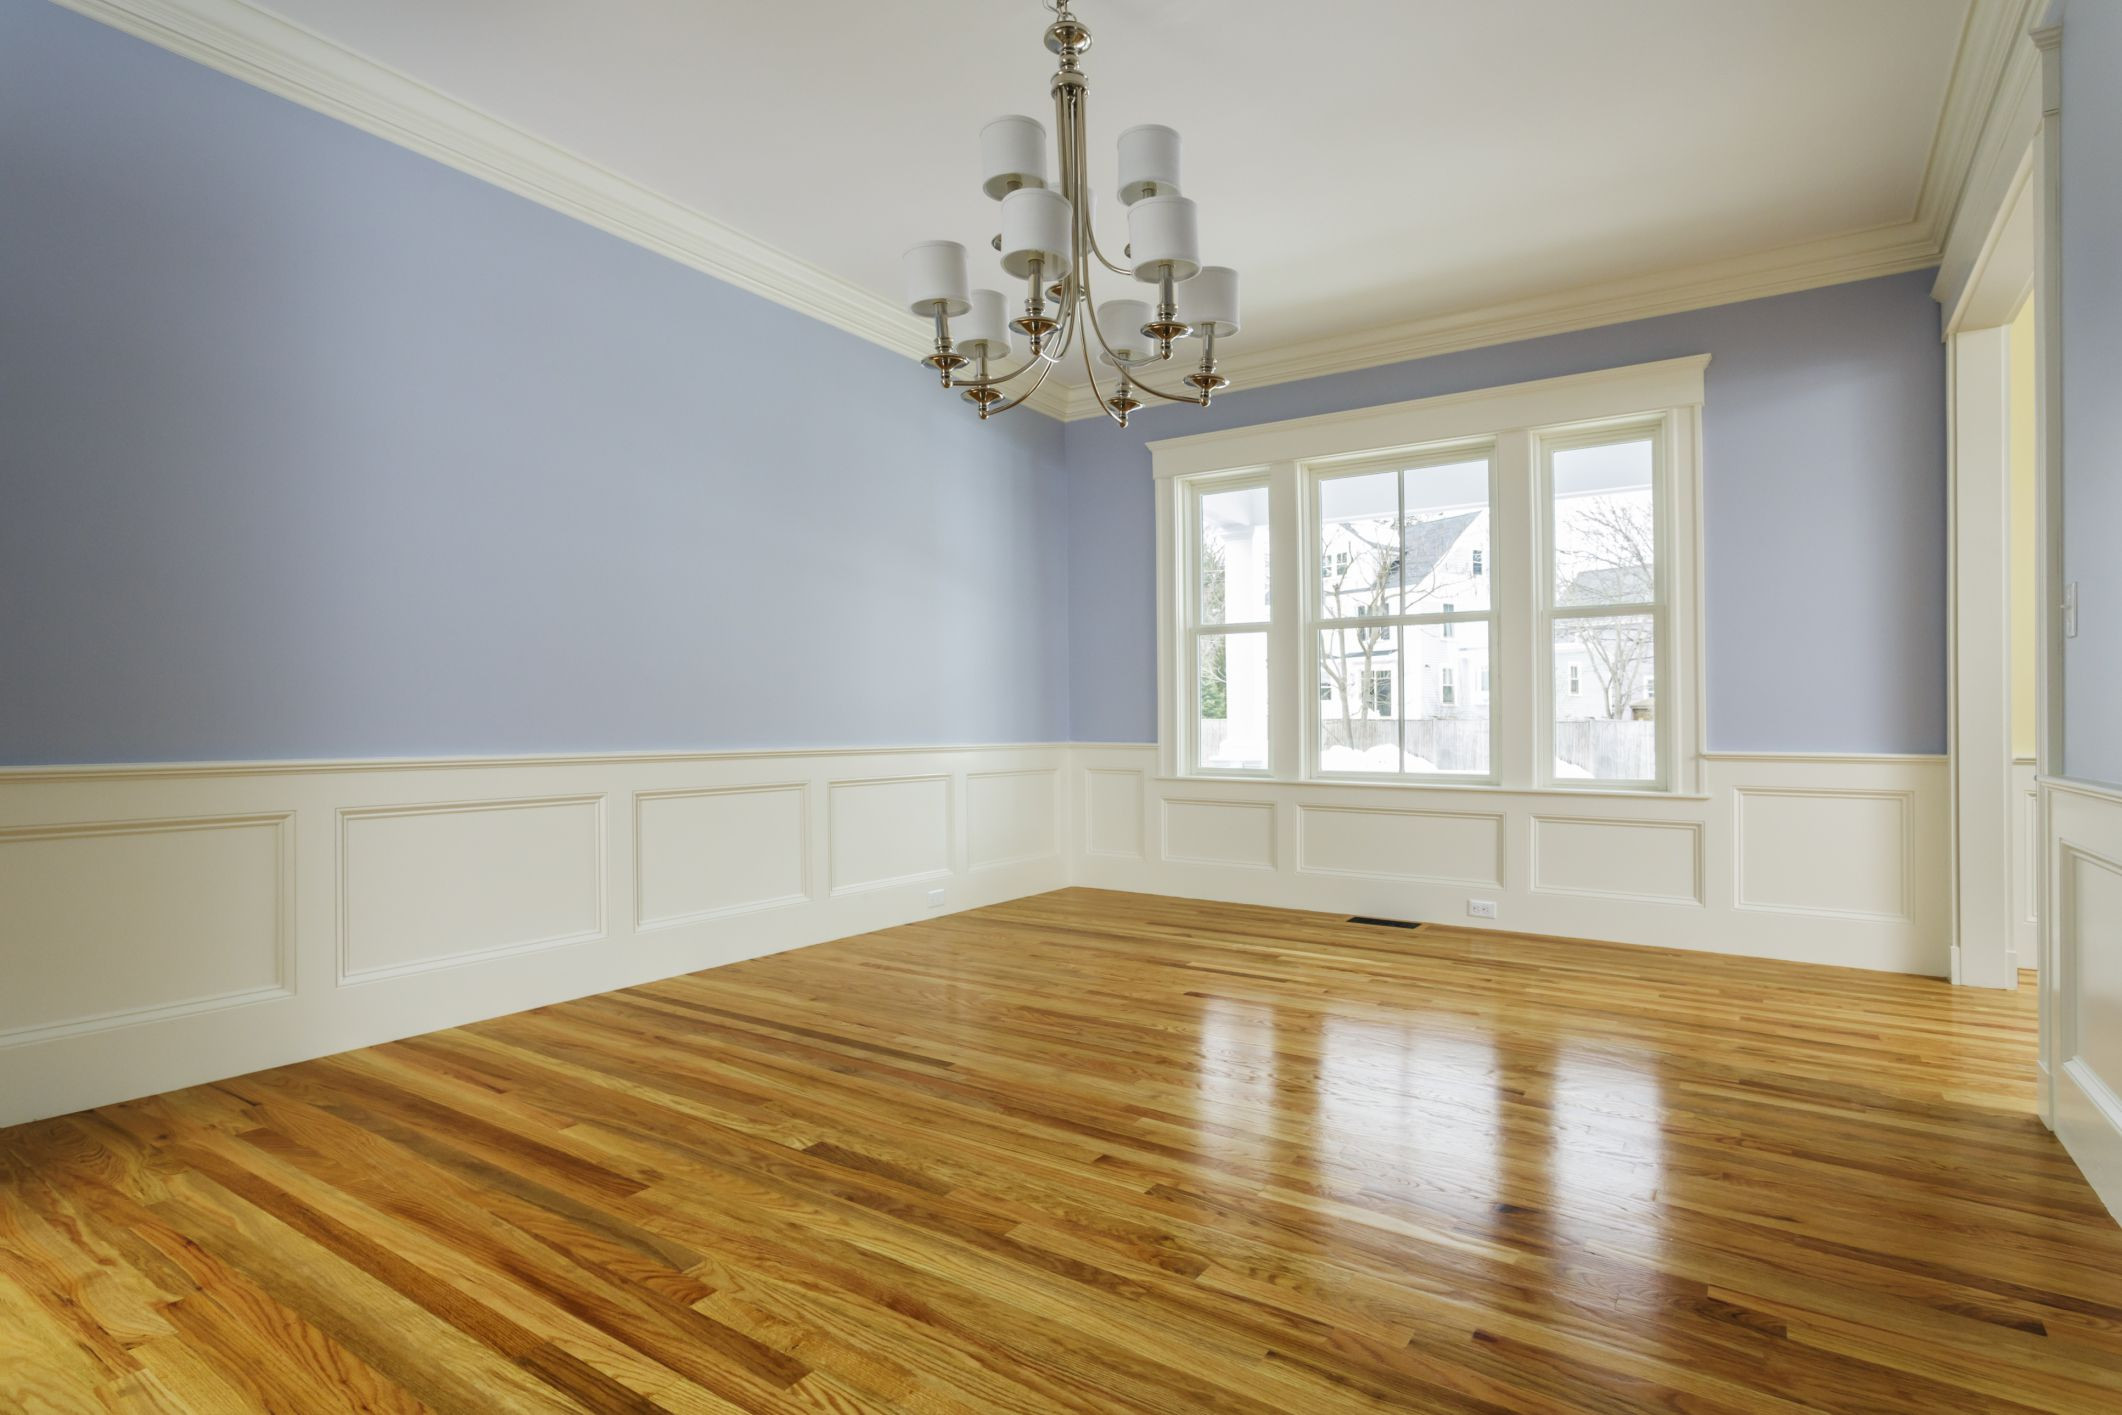 22 Awesome Hardwood Floor Restoration before and after 2024 free download hardwood floor restoration before and after of the cost to refinish hardwood floors pertaining to 168686572 highres 56a2fd773df78cf7727b6cb3